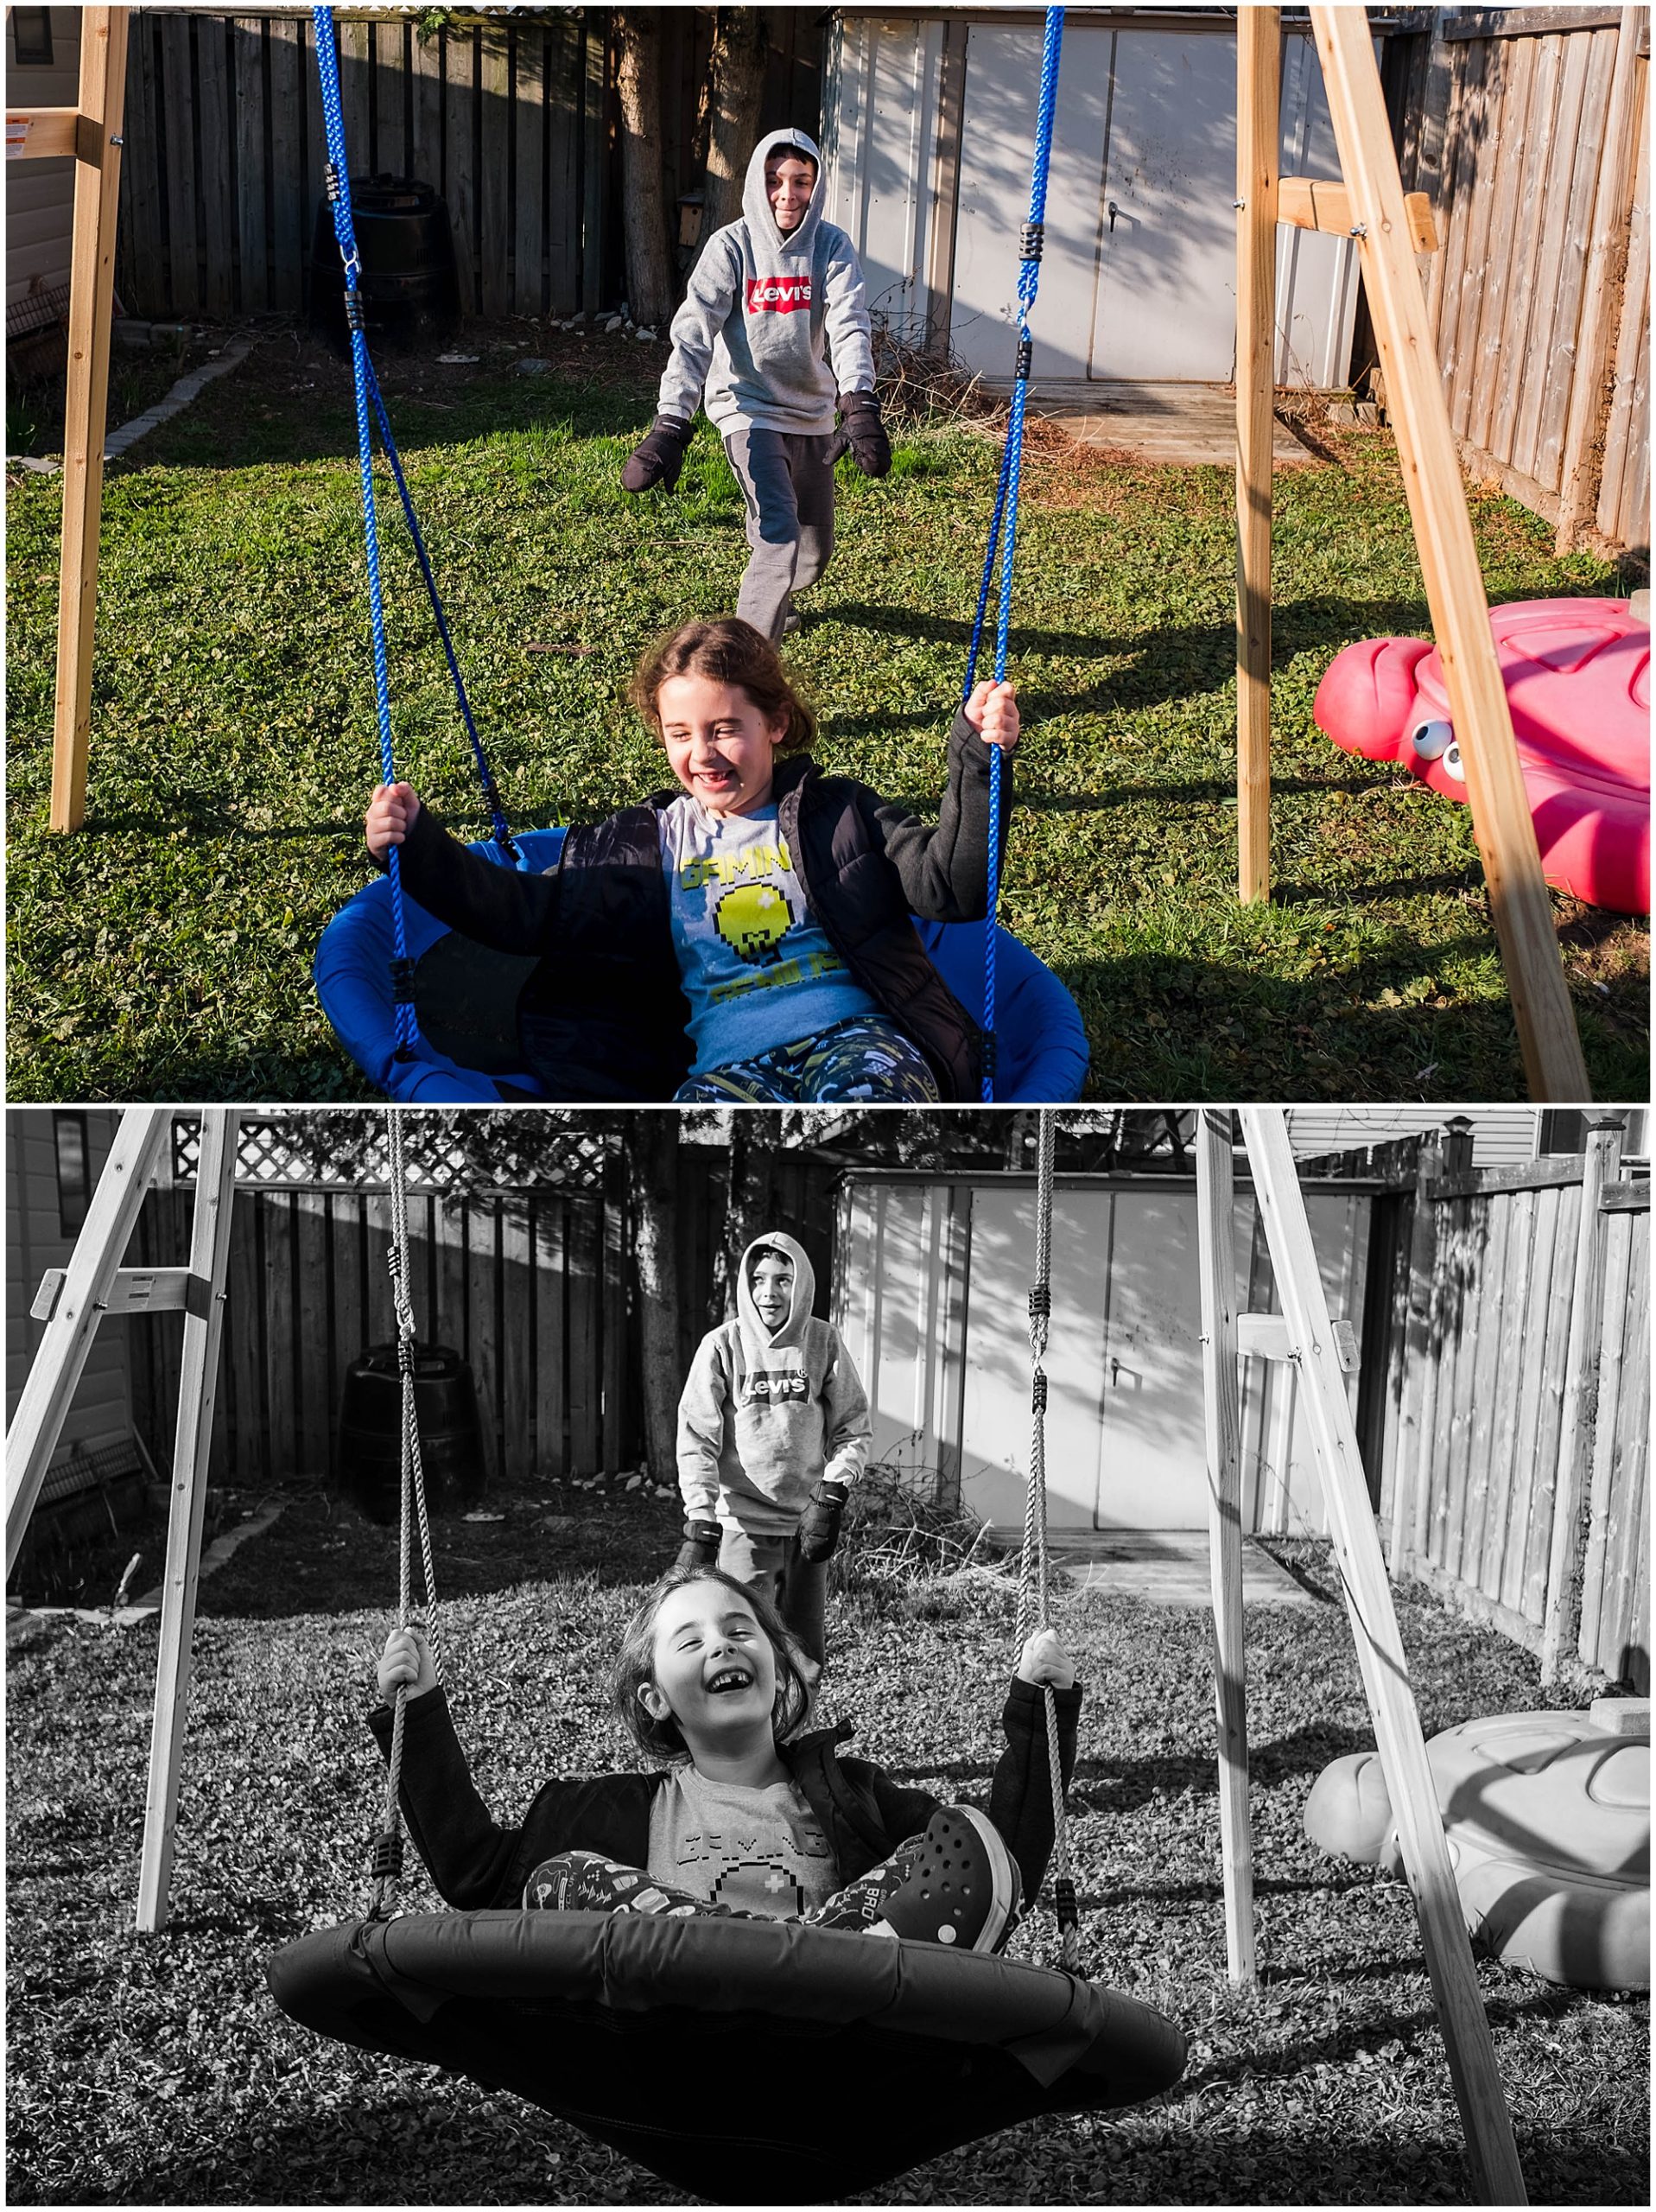 Playing on new swing things to do with the kids.jpg